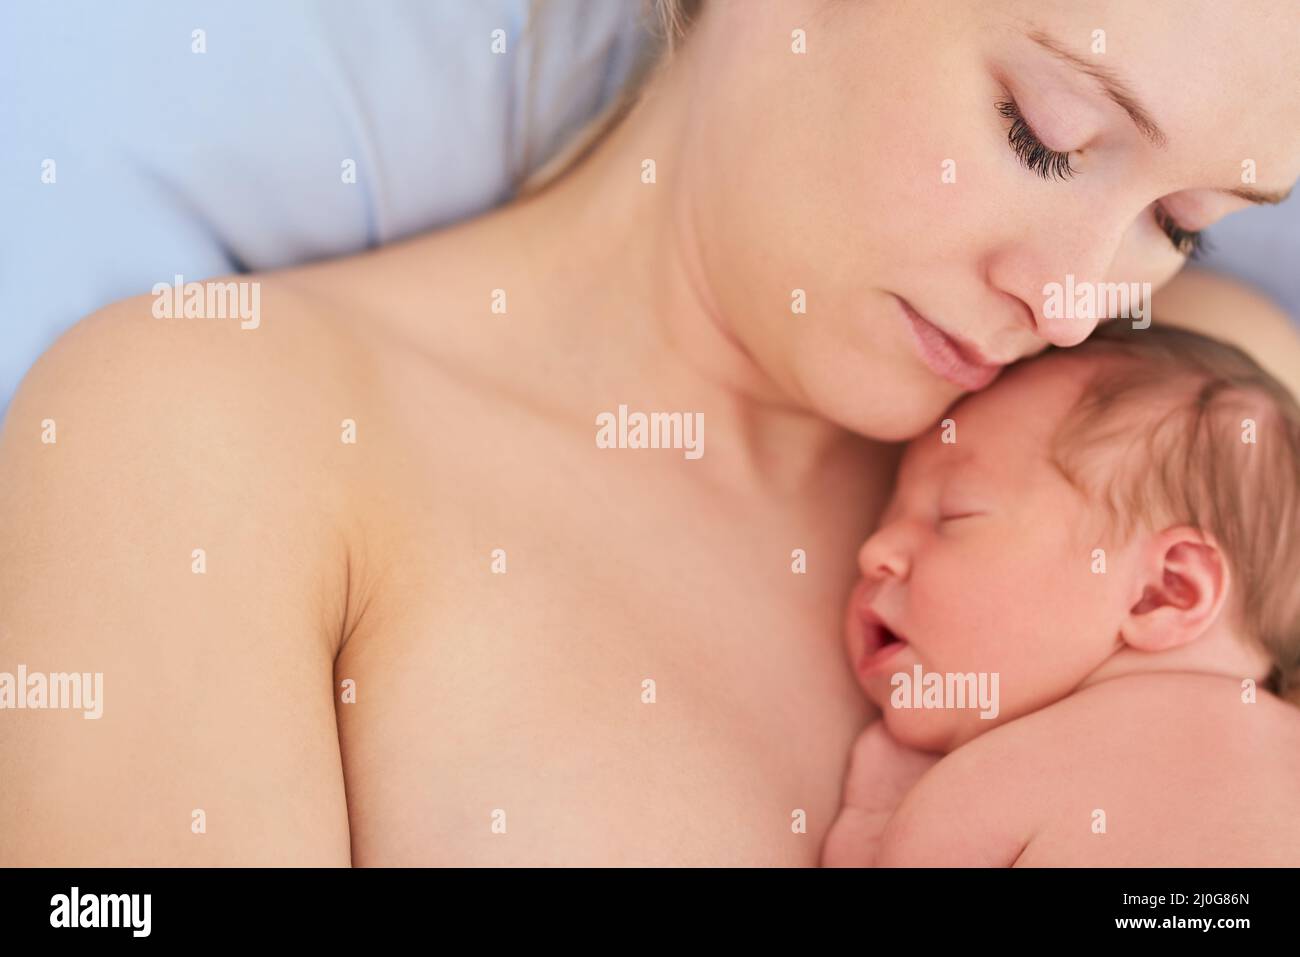 She just makes my heart melt. Shot of a beautiful young mother and her newly born baby girl sleeping in a hospital bed together. Stock Photo